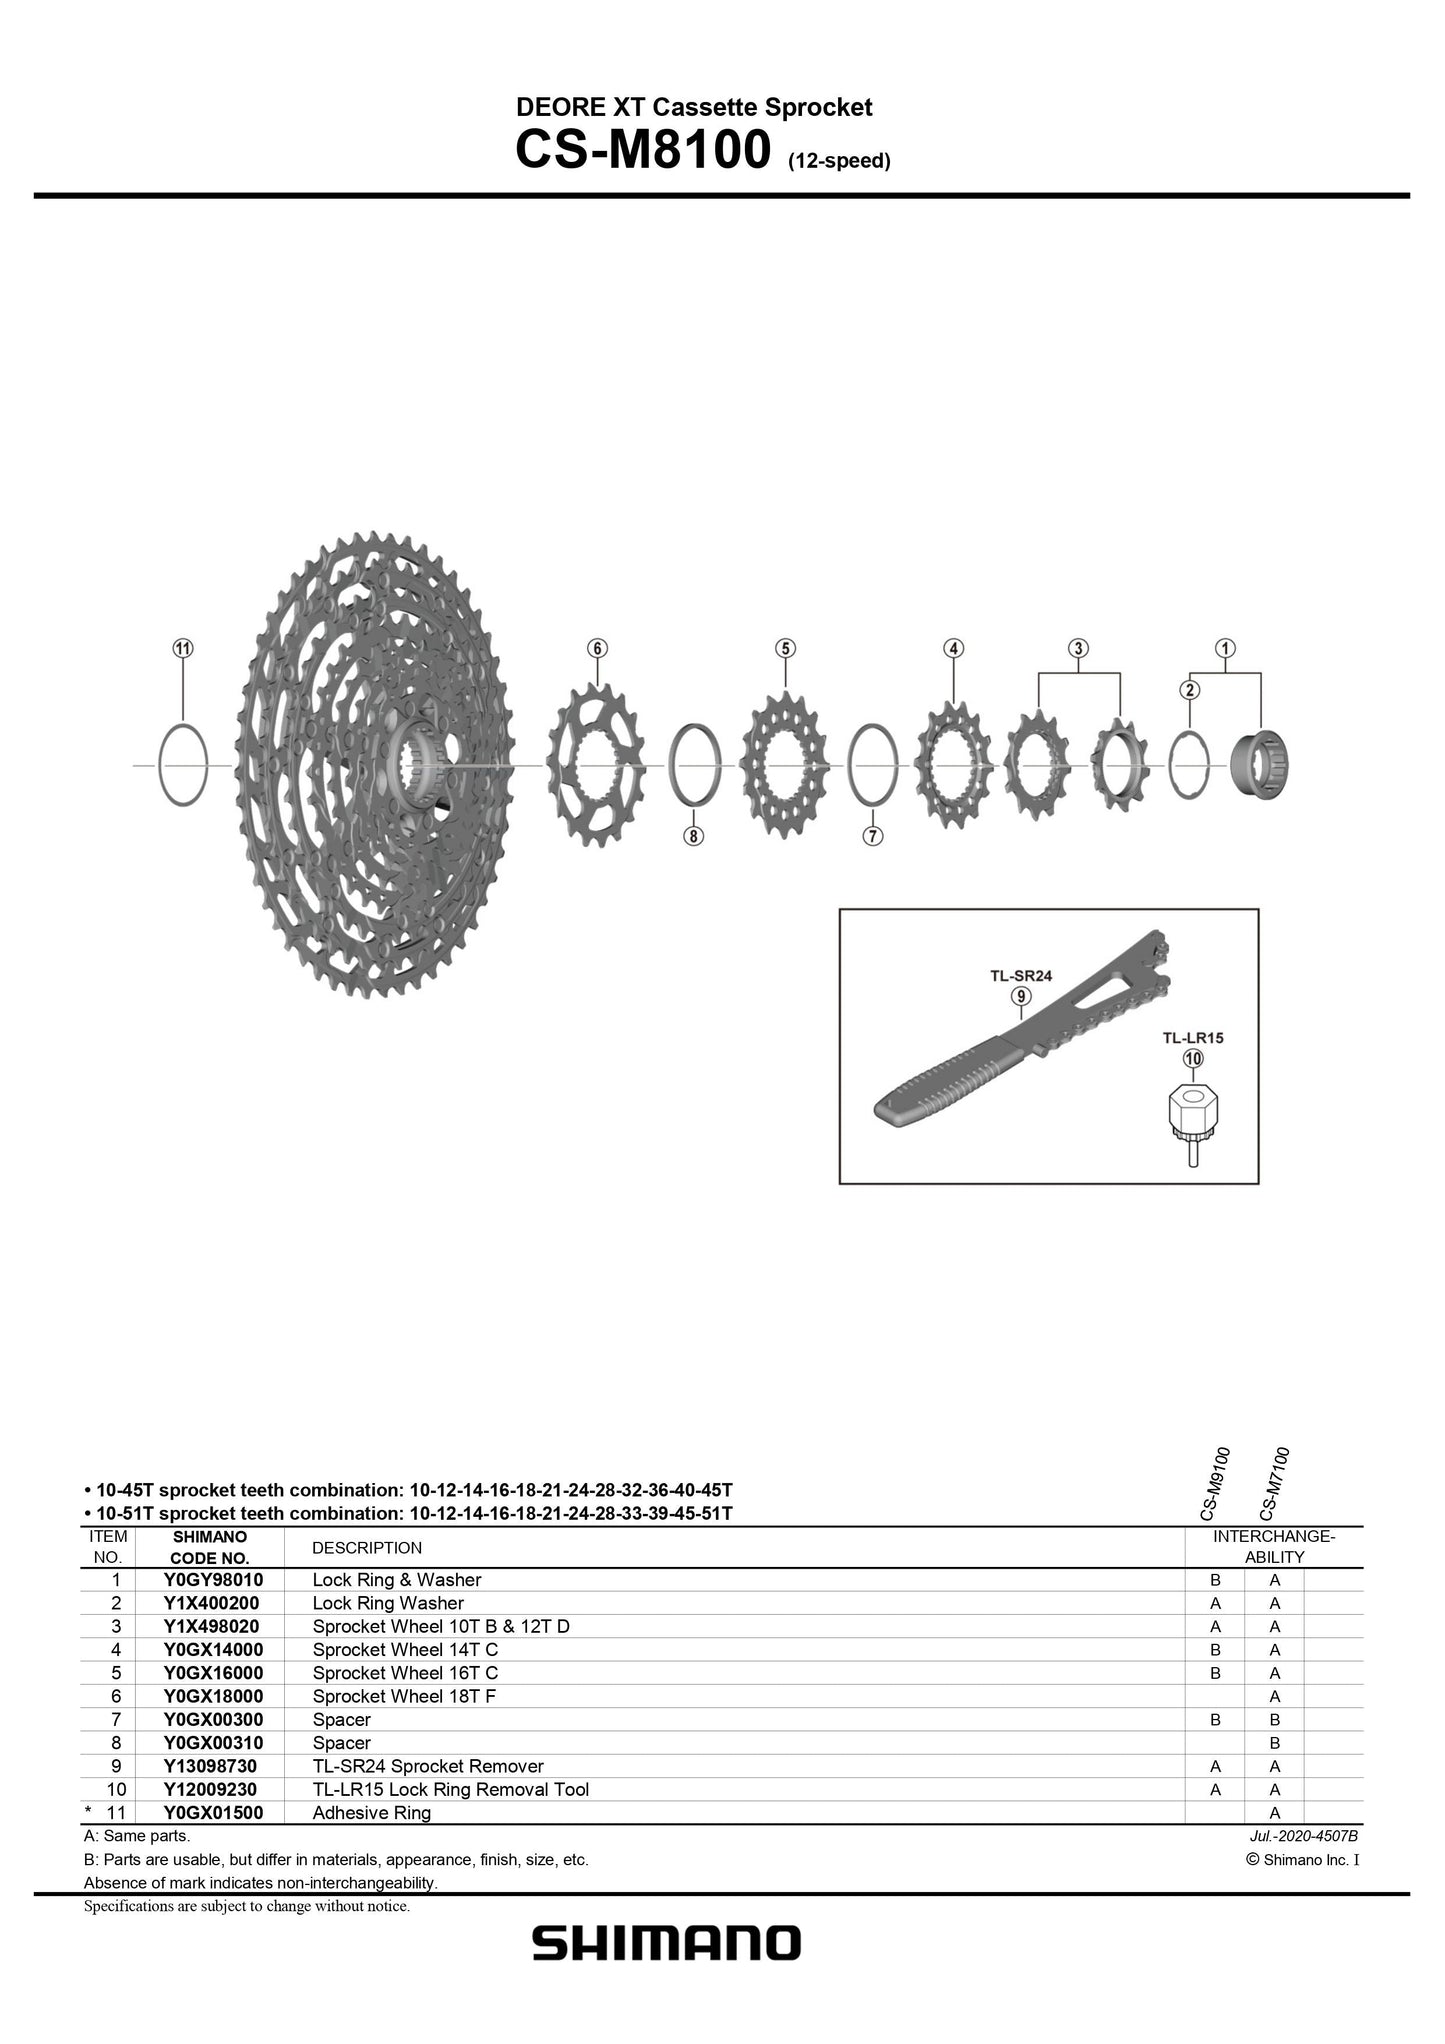 SHIMANO Deore CS-M8100 Cassette Sprocket Spacer A - 0.95 - (12-Speed) - Y0GX00300-Pit Crew Cycles